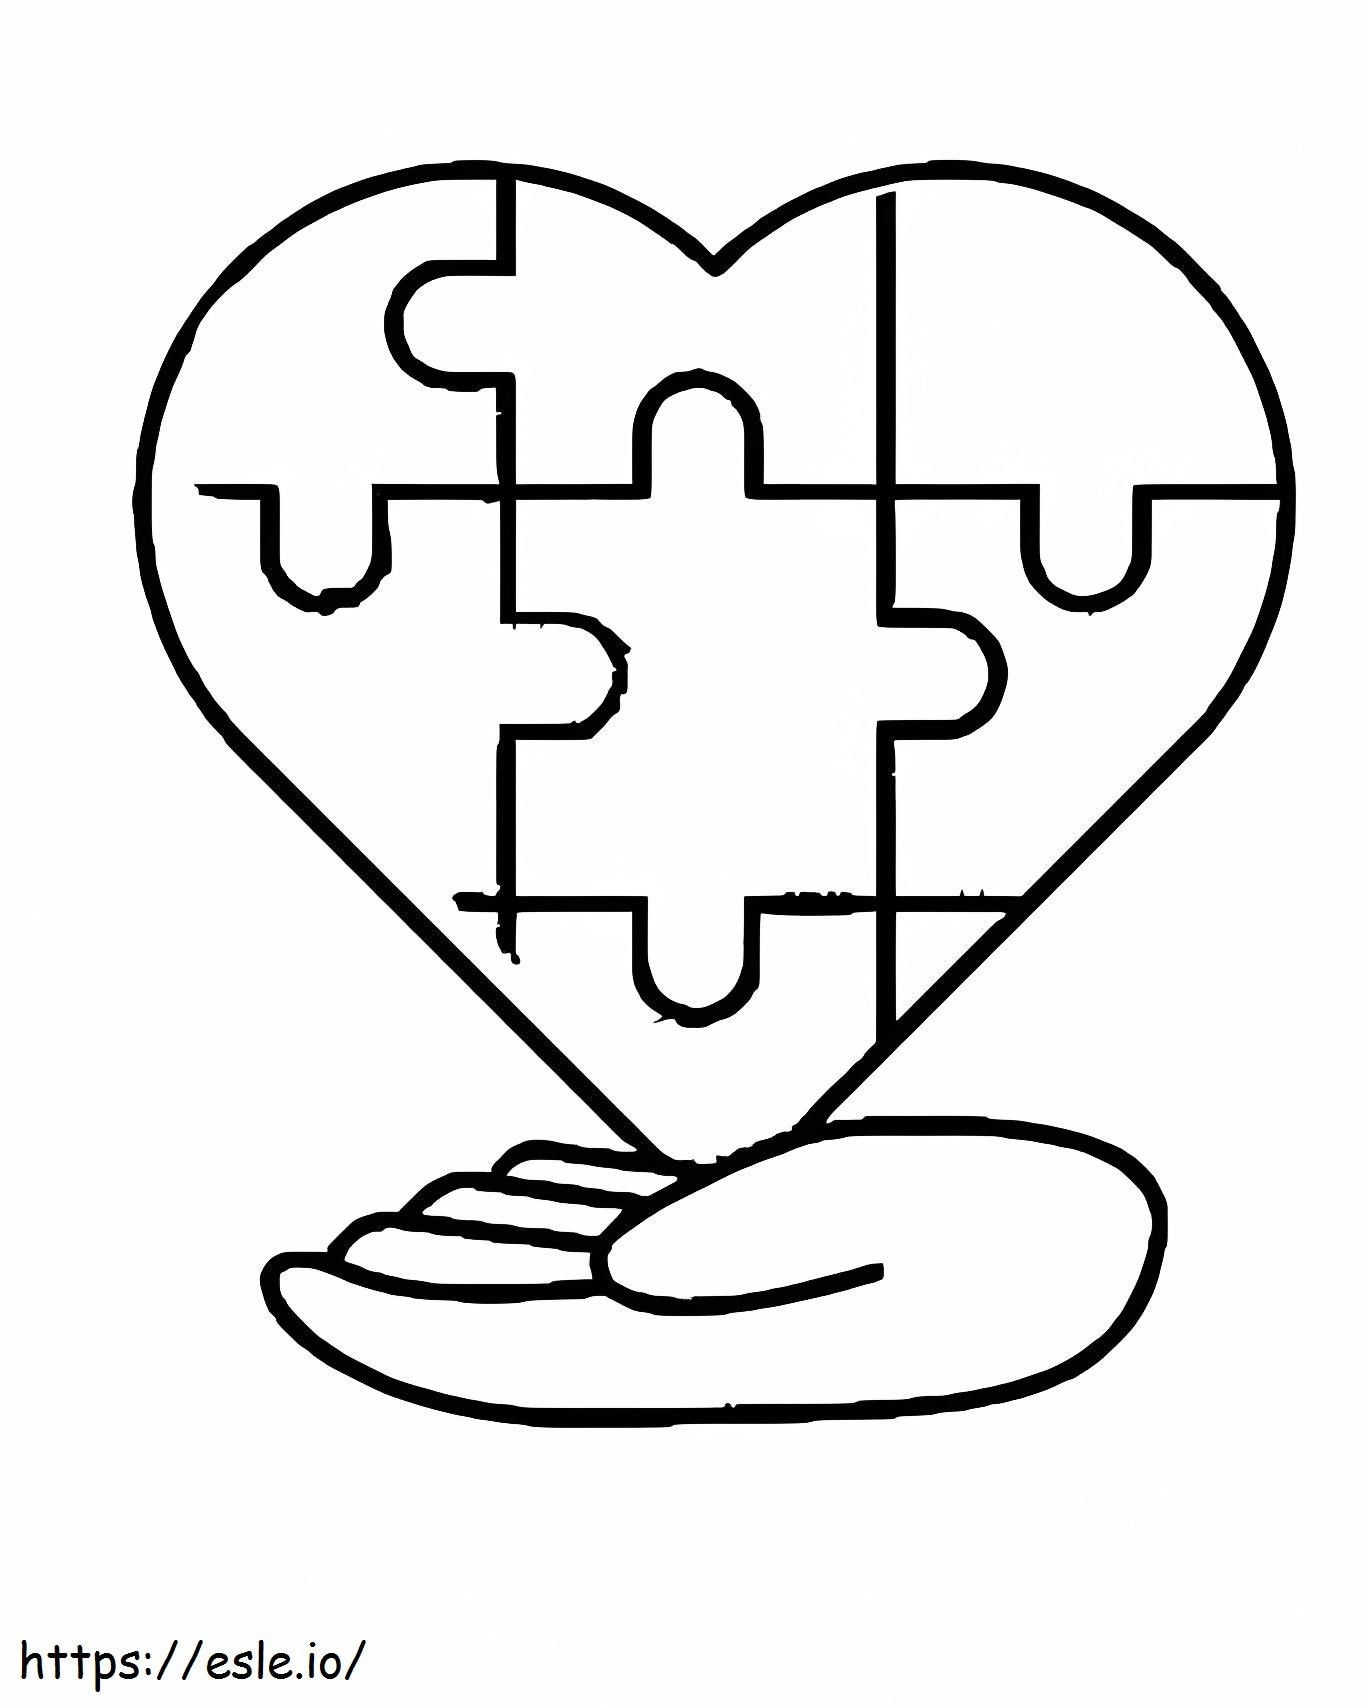 Autism Awareness Hand With Heart coloring page